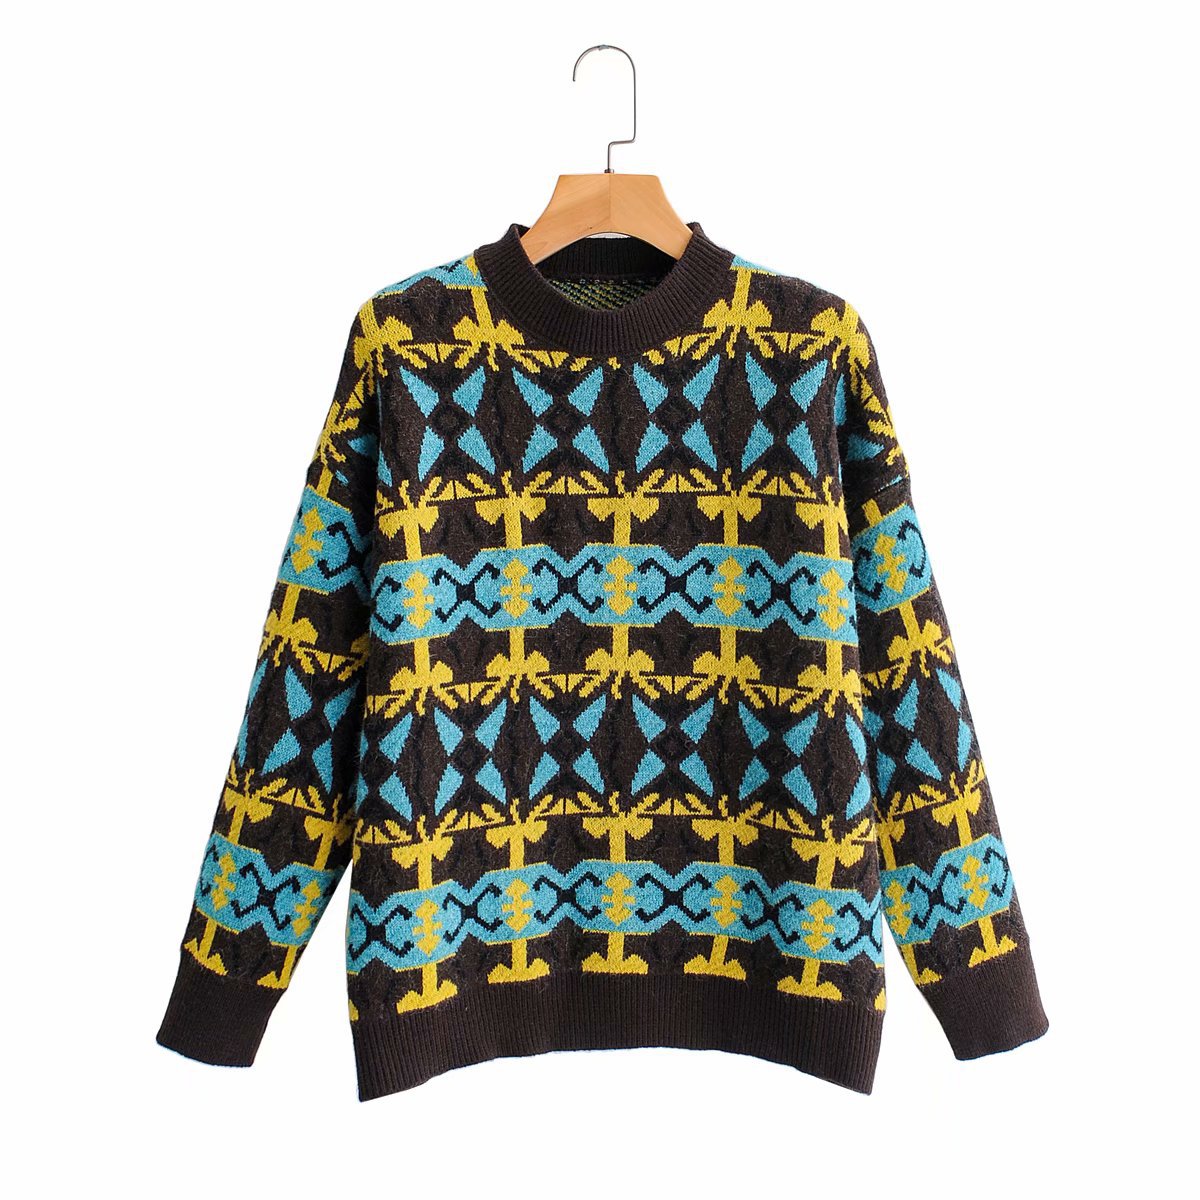 Retro Loose-fitting Haraju-pop Patterned Pullovers With Long Sleeves